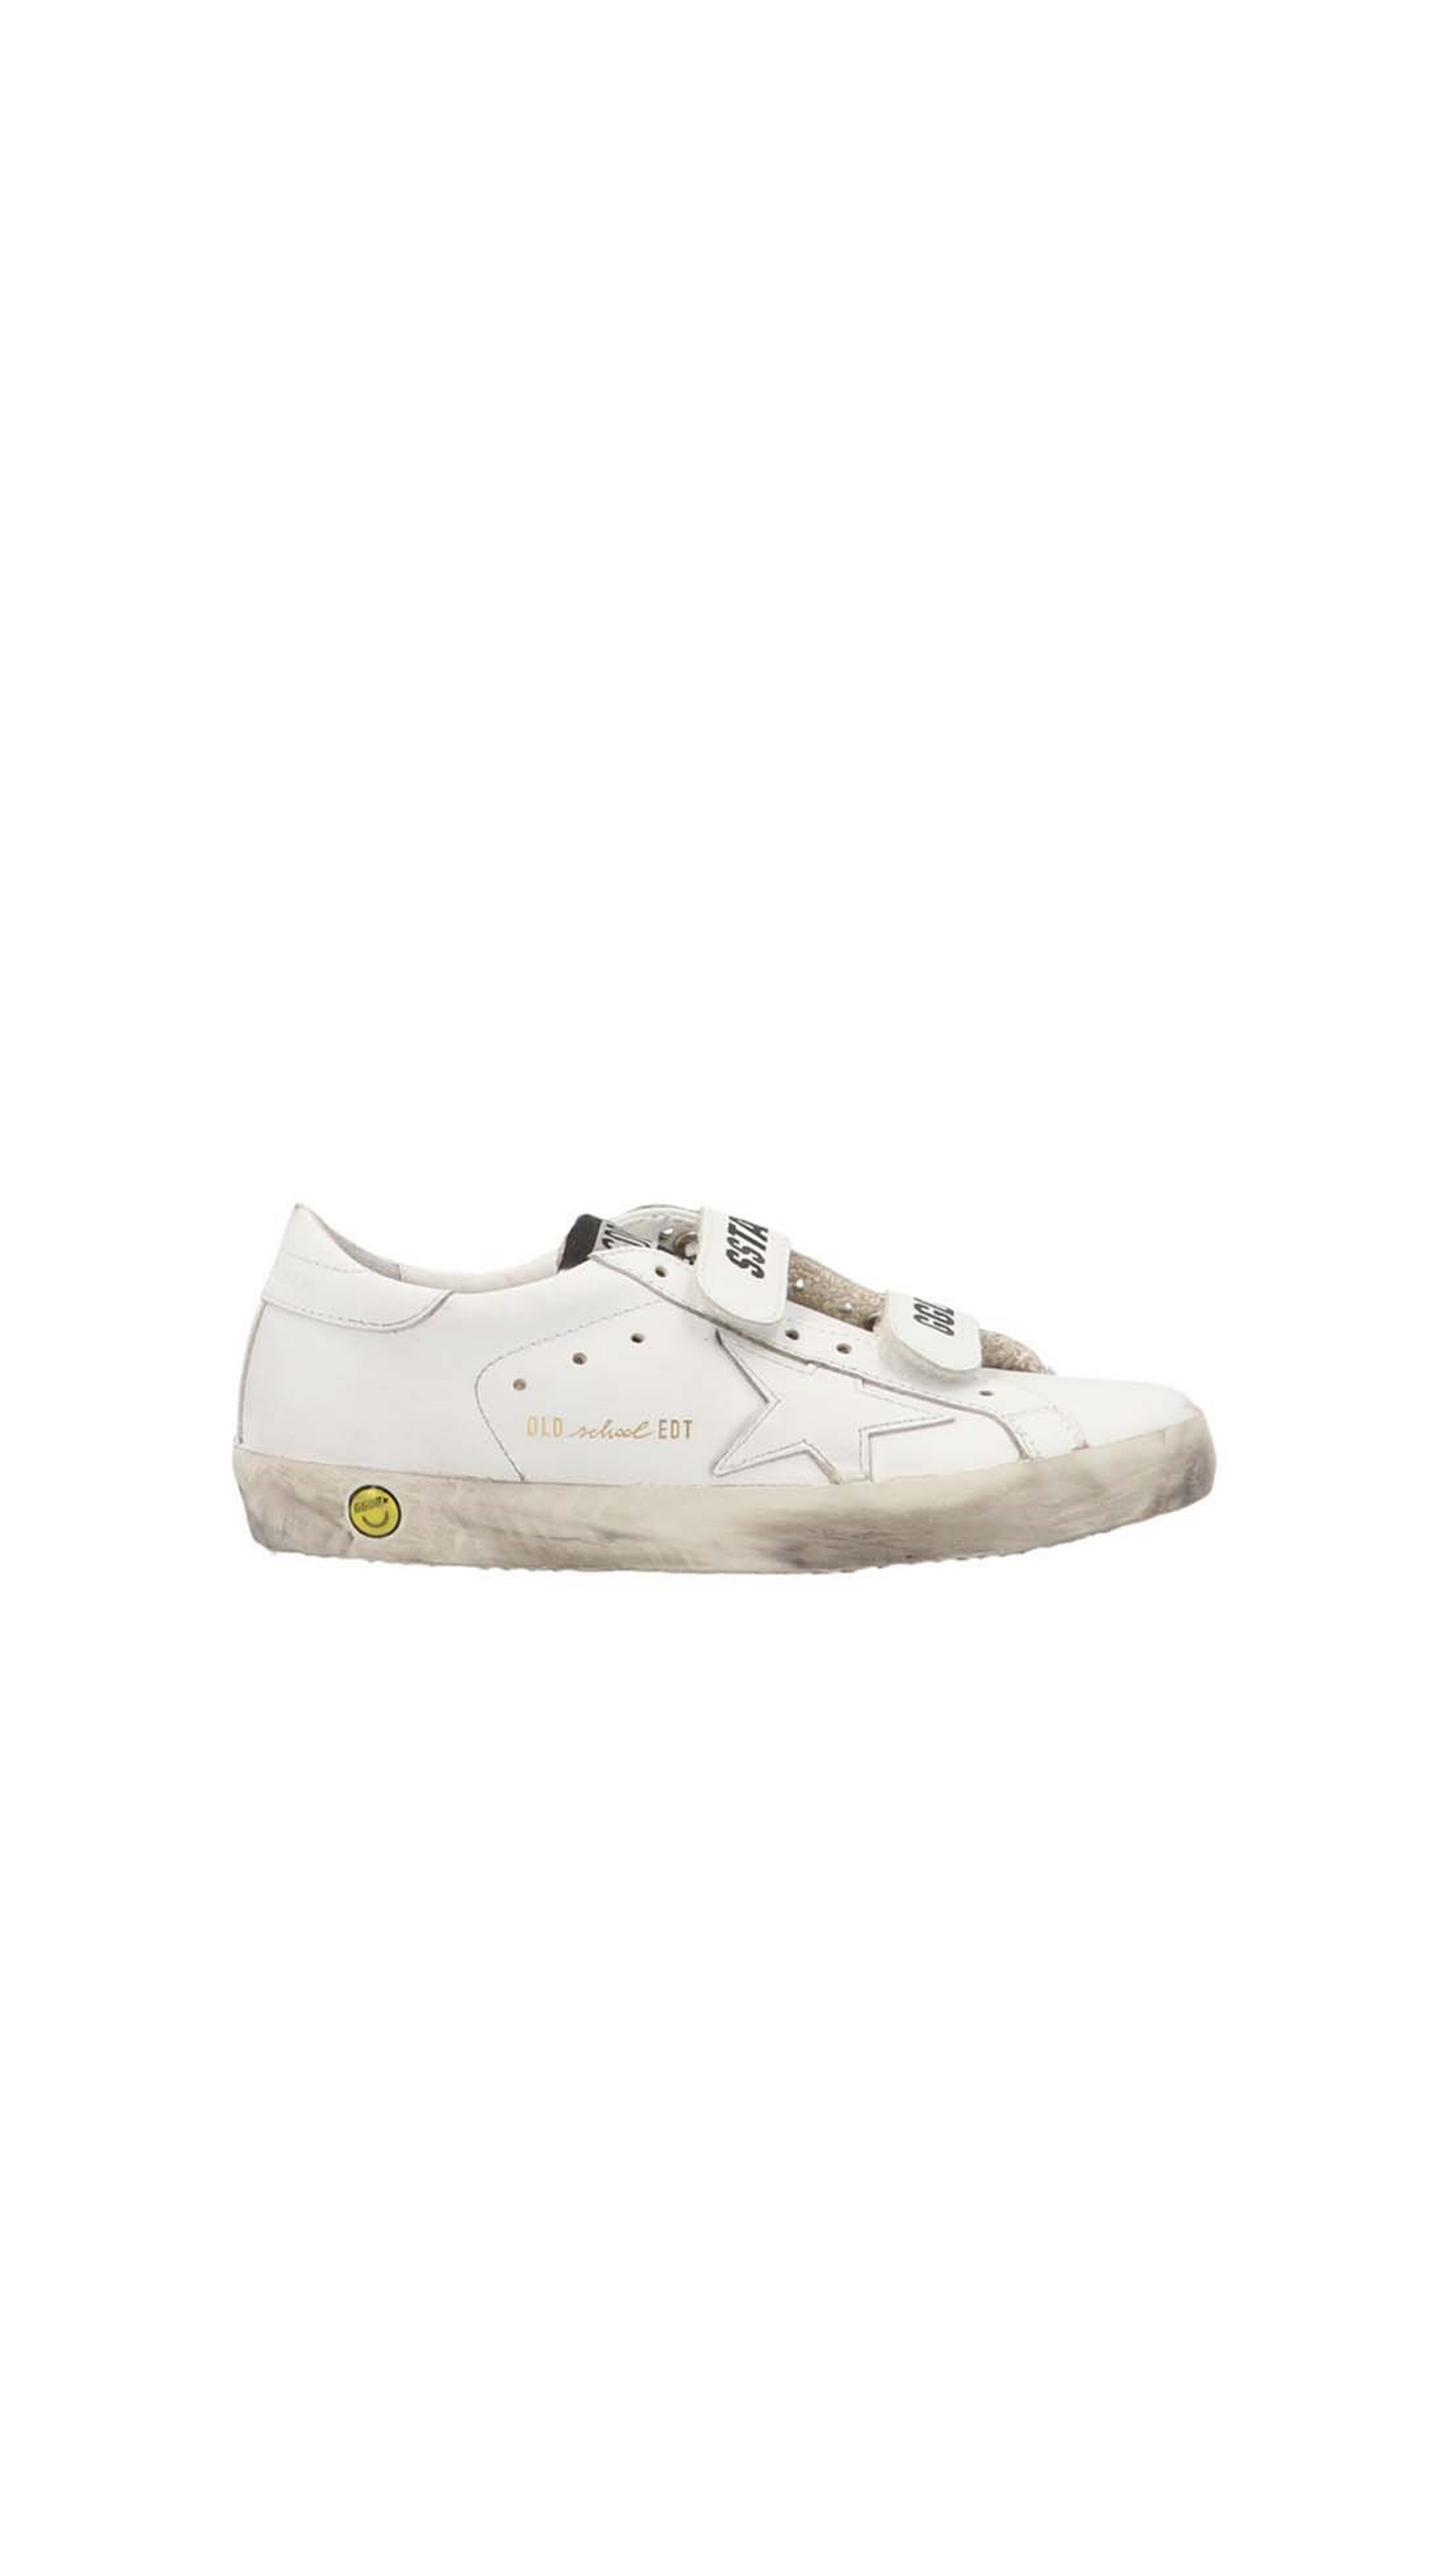 Old School Sneakers With Velcro Closure - White